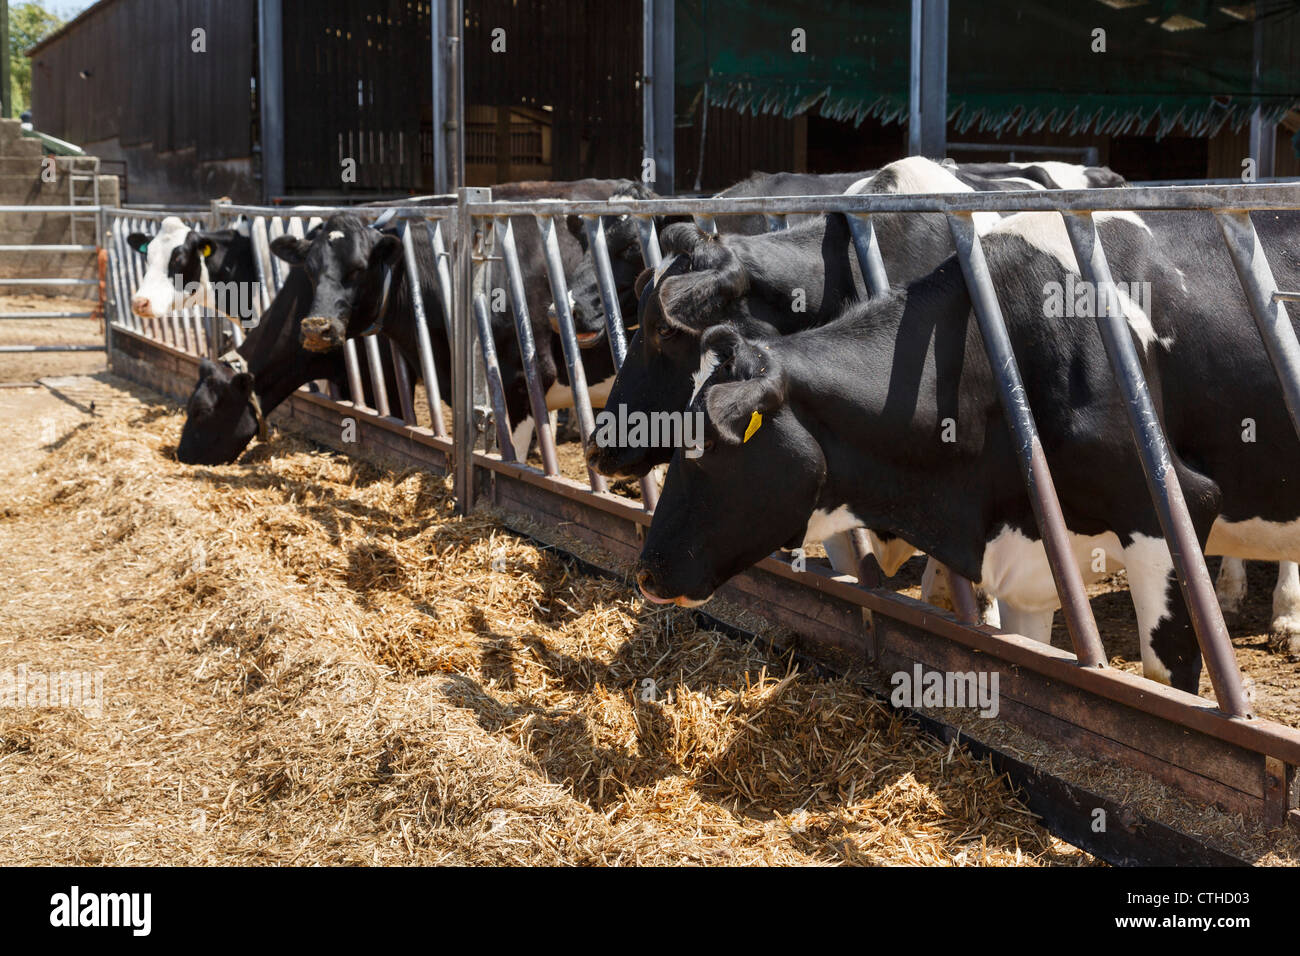 Farming scene of herd of black and white Friesian dairy cows feeding on hay through bars in a cowshed on a farm farmyard in Dorset England UK Britain Stock Photo